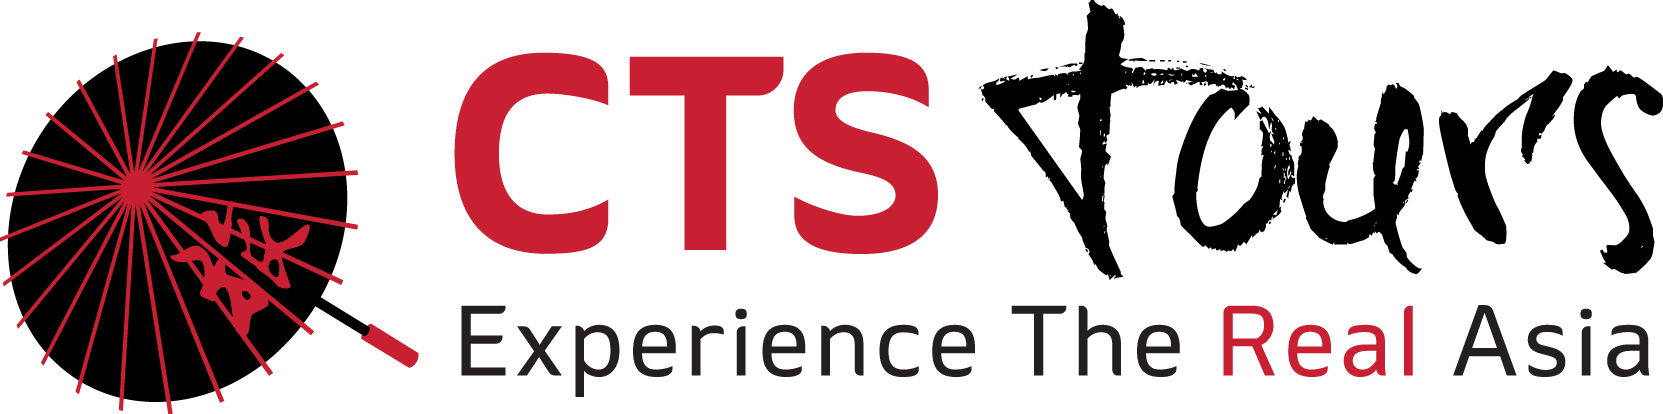 cts travel and tours